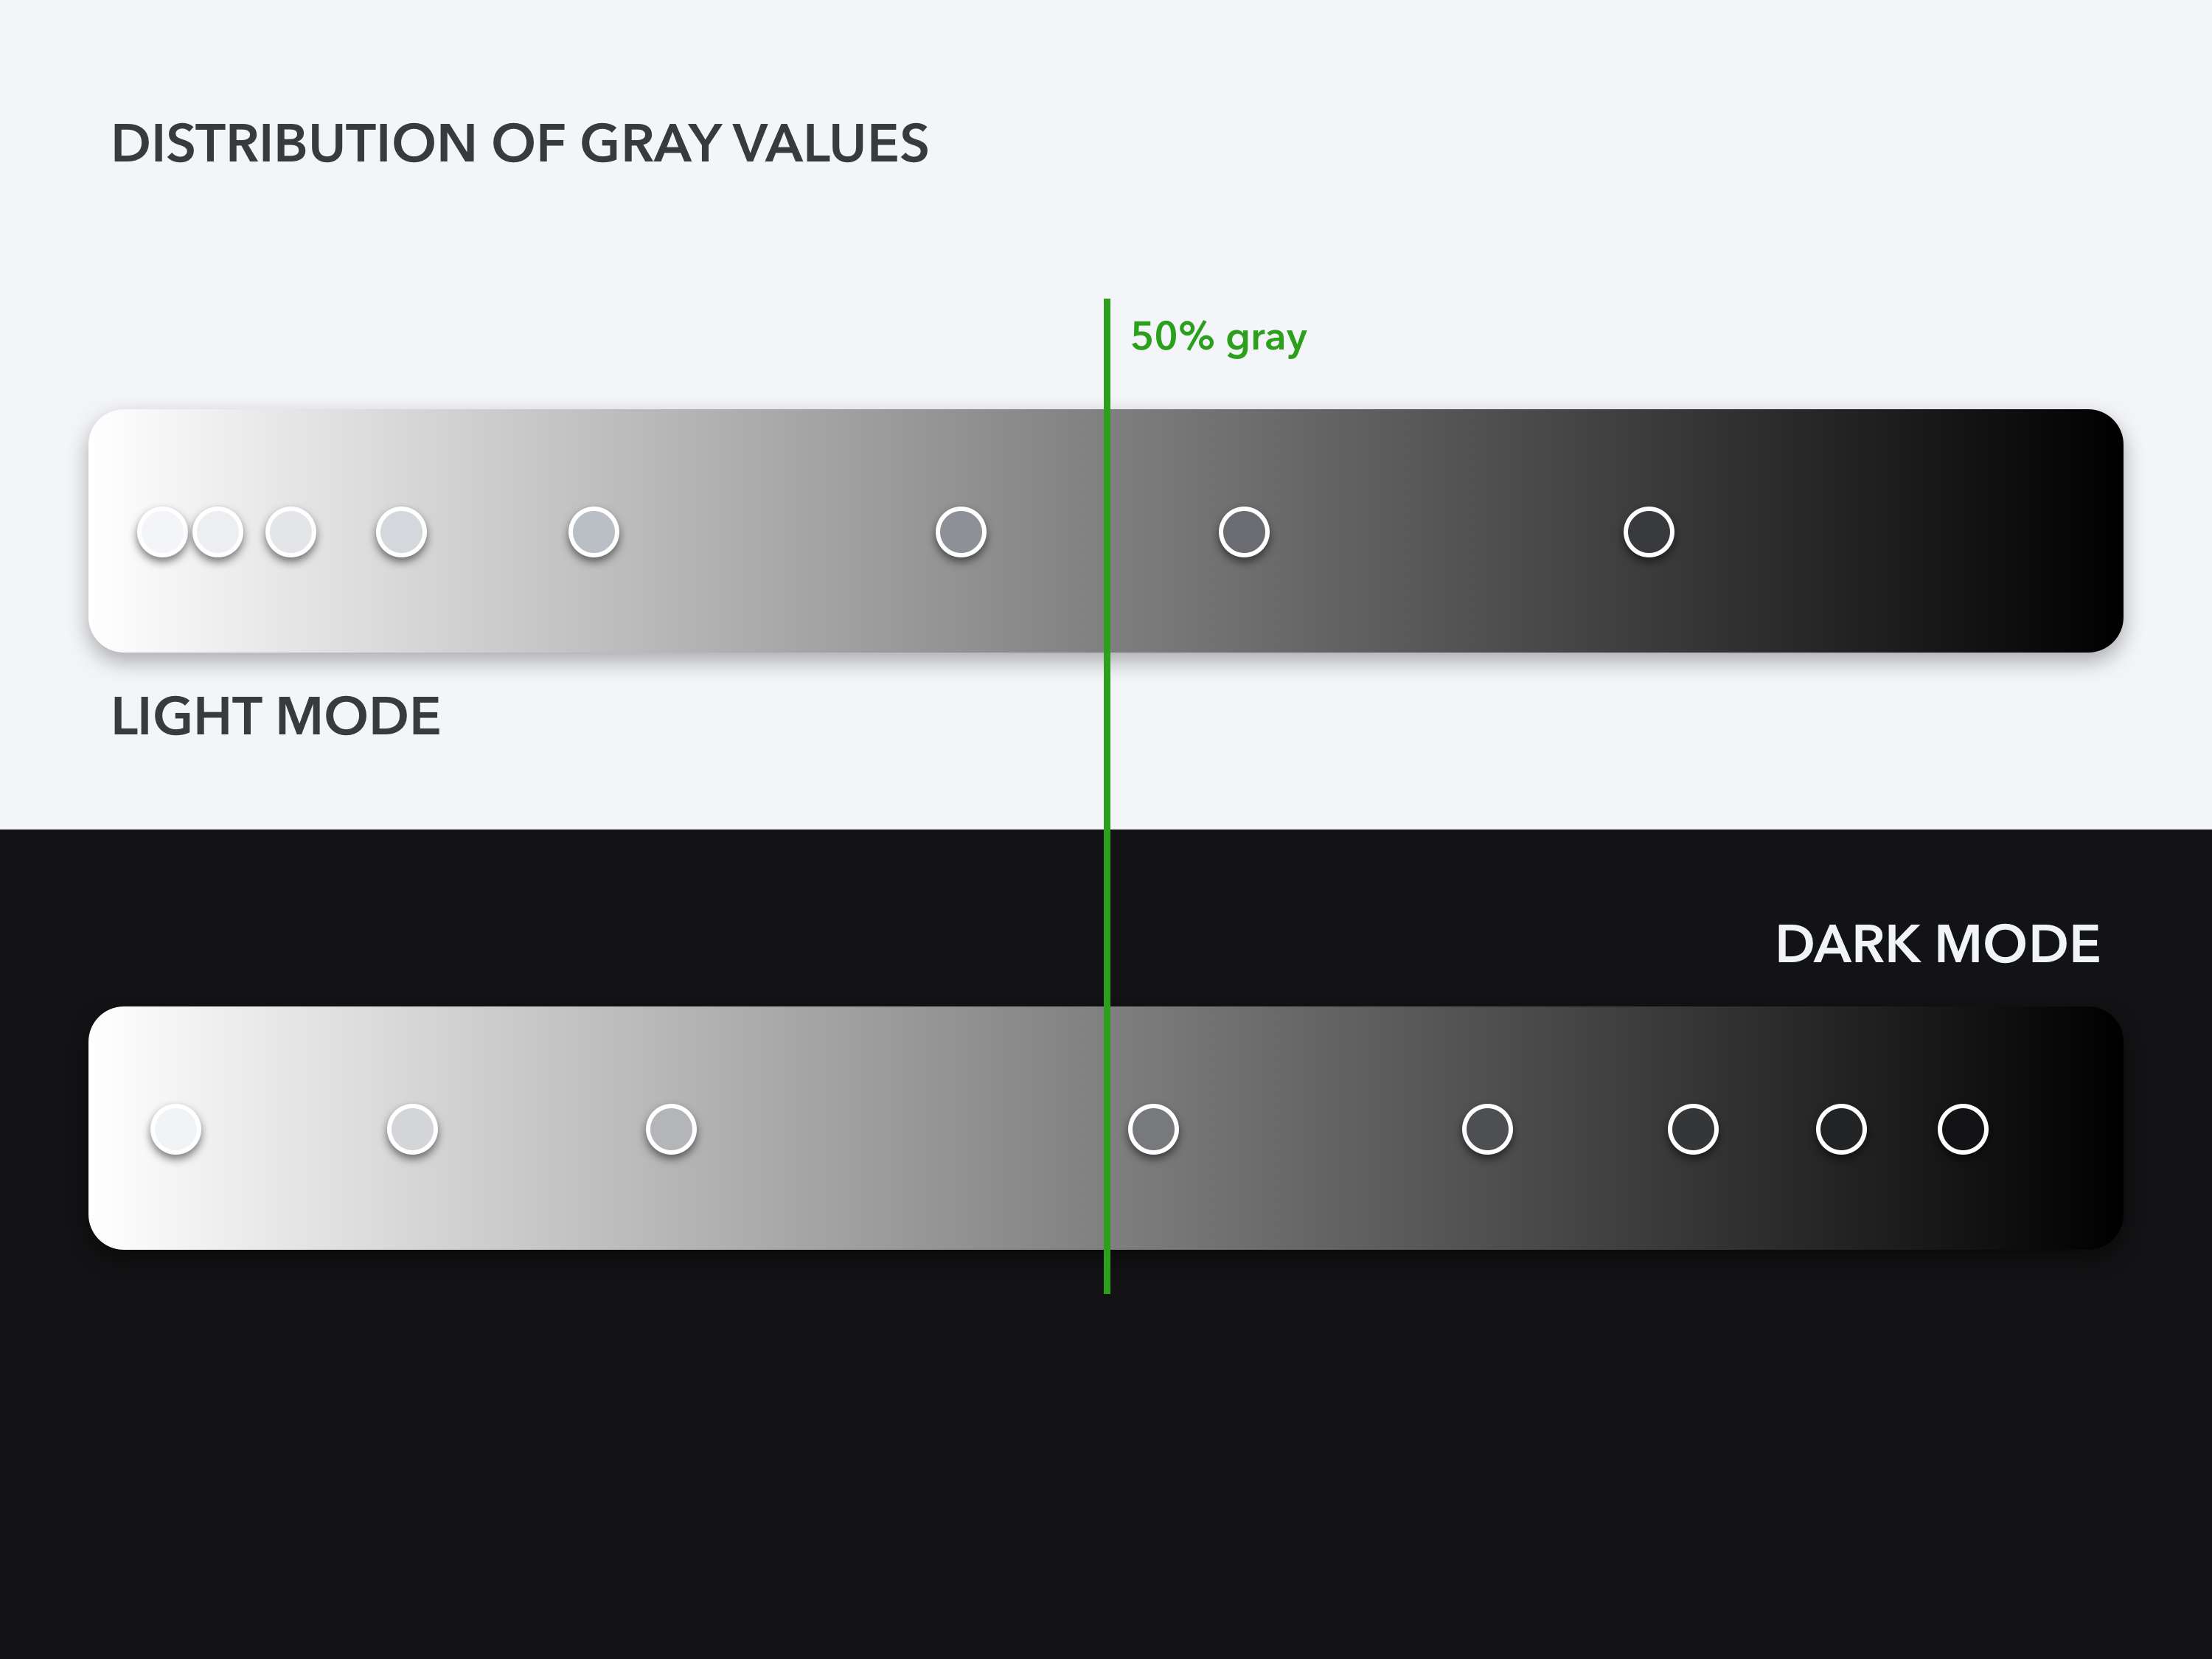 A visualization of the gray values divided at 50% brightness. The dark mode palette has more colors available below this threshold.